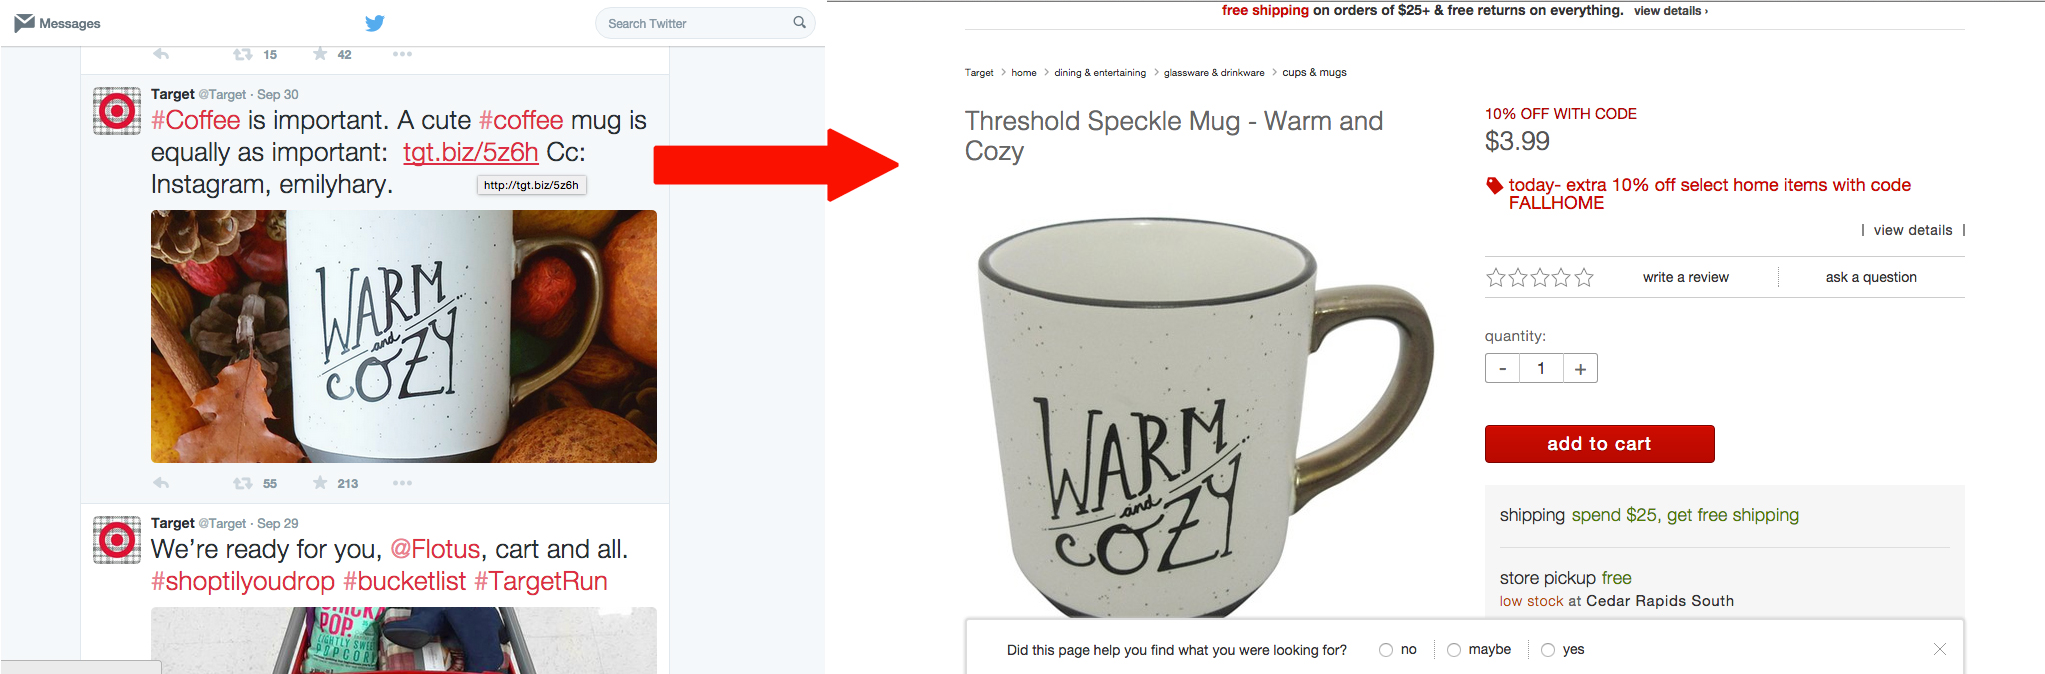 target social selling example for ecommerce business